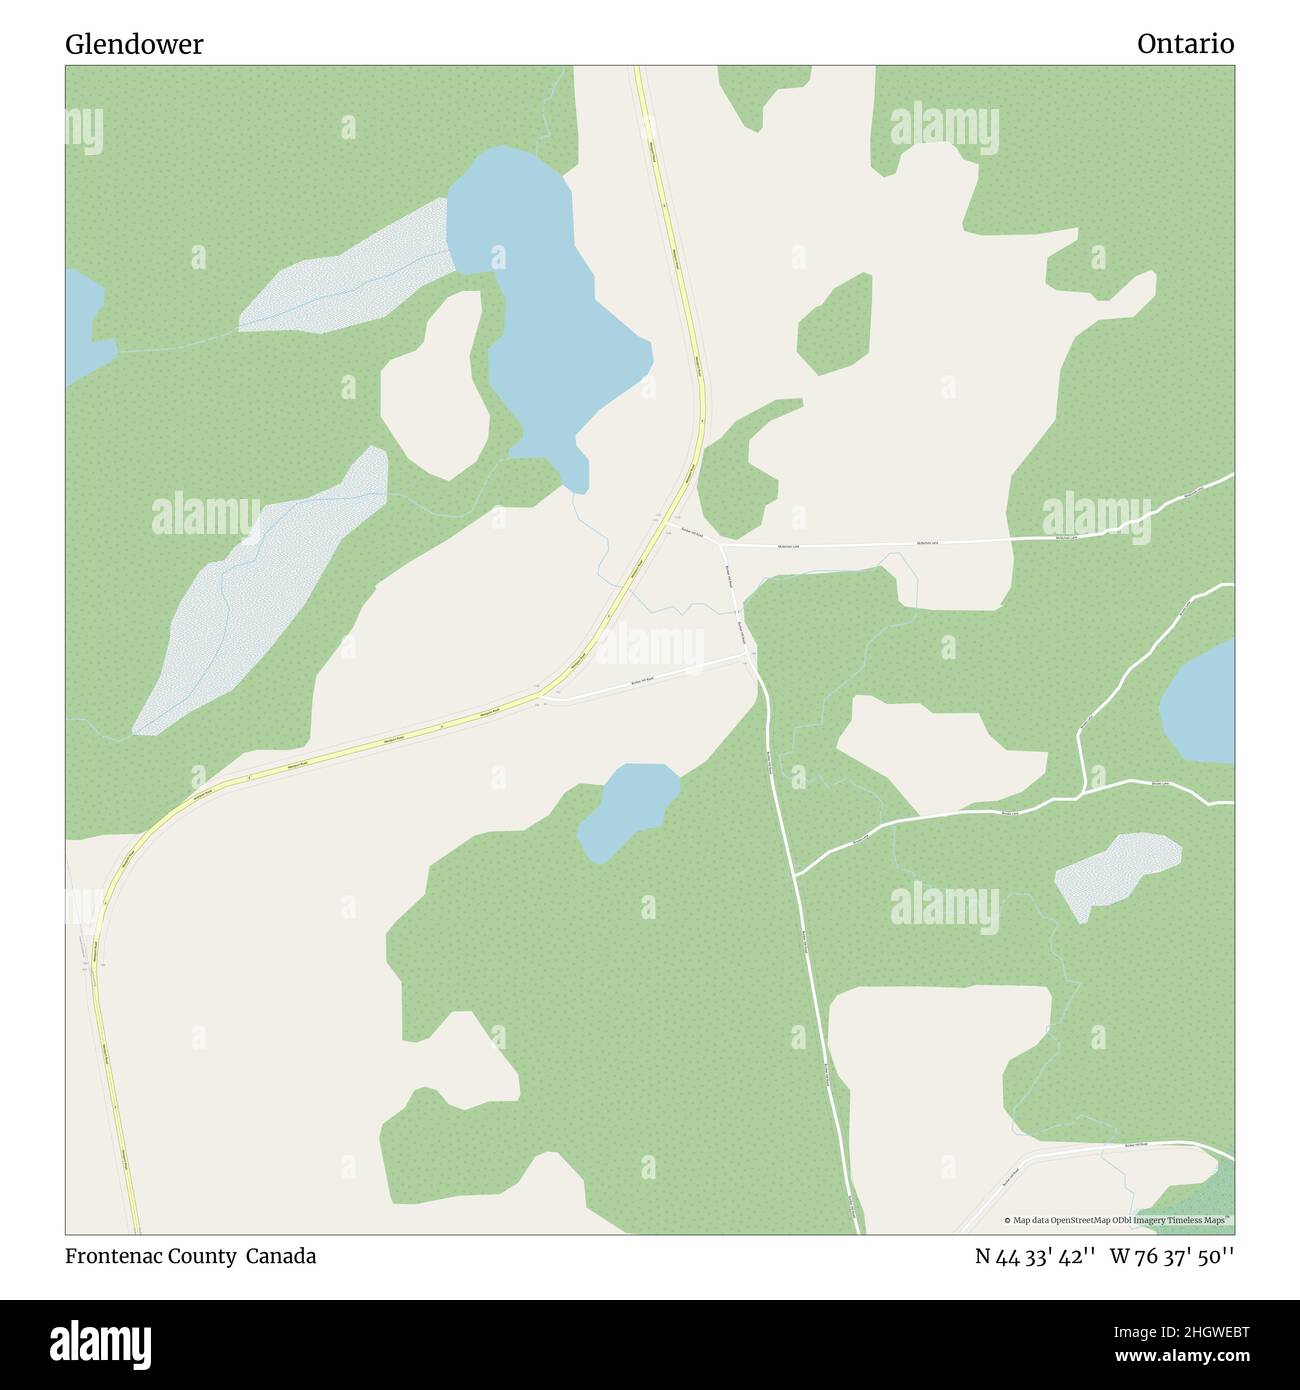 Glendower, Frontenac County, Canada, Ontario, N 44 33' 42'', W 76 37' 50'', map, Timeless Map published in 2021. Travelers, explorers and adventurers like Florence Nightingale, David Livingstone, Ernest Shackleton, Lewis and Clark and Sherlock Holmes relied on maps to plan travels to the world's most remote corners, Timeless Maps is mapping most locations on the globe, showing the achievement of great dreams Stock Photo